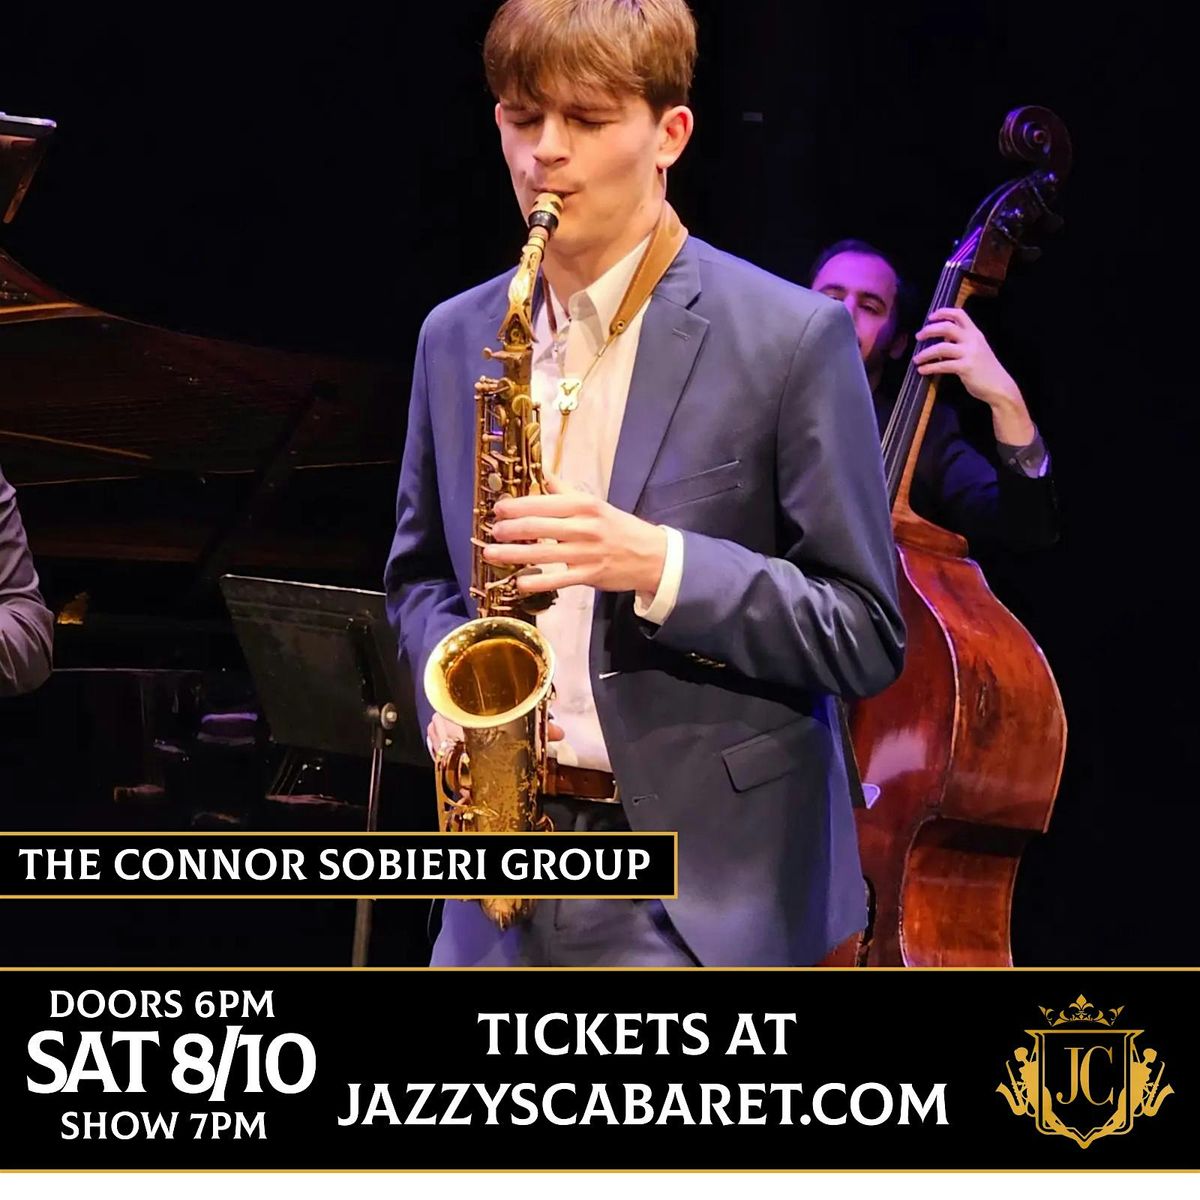 JAZZ IN THE CITY Presents The Connor Sobieri Group